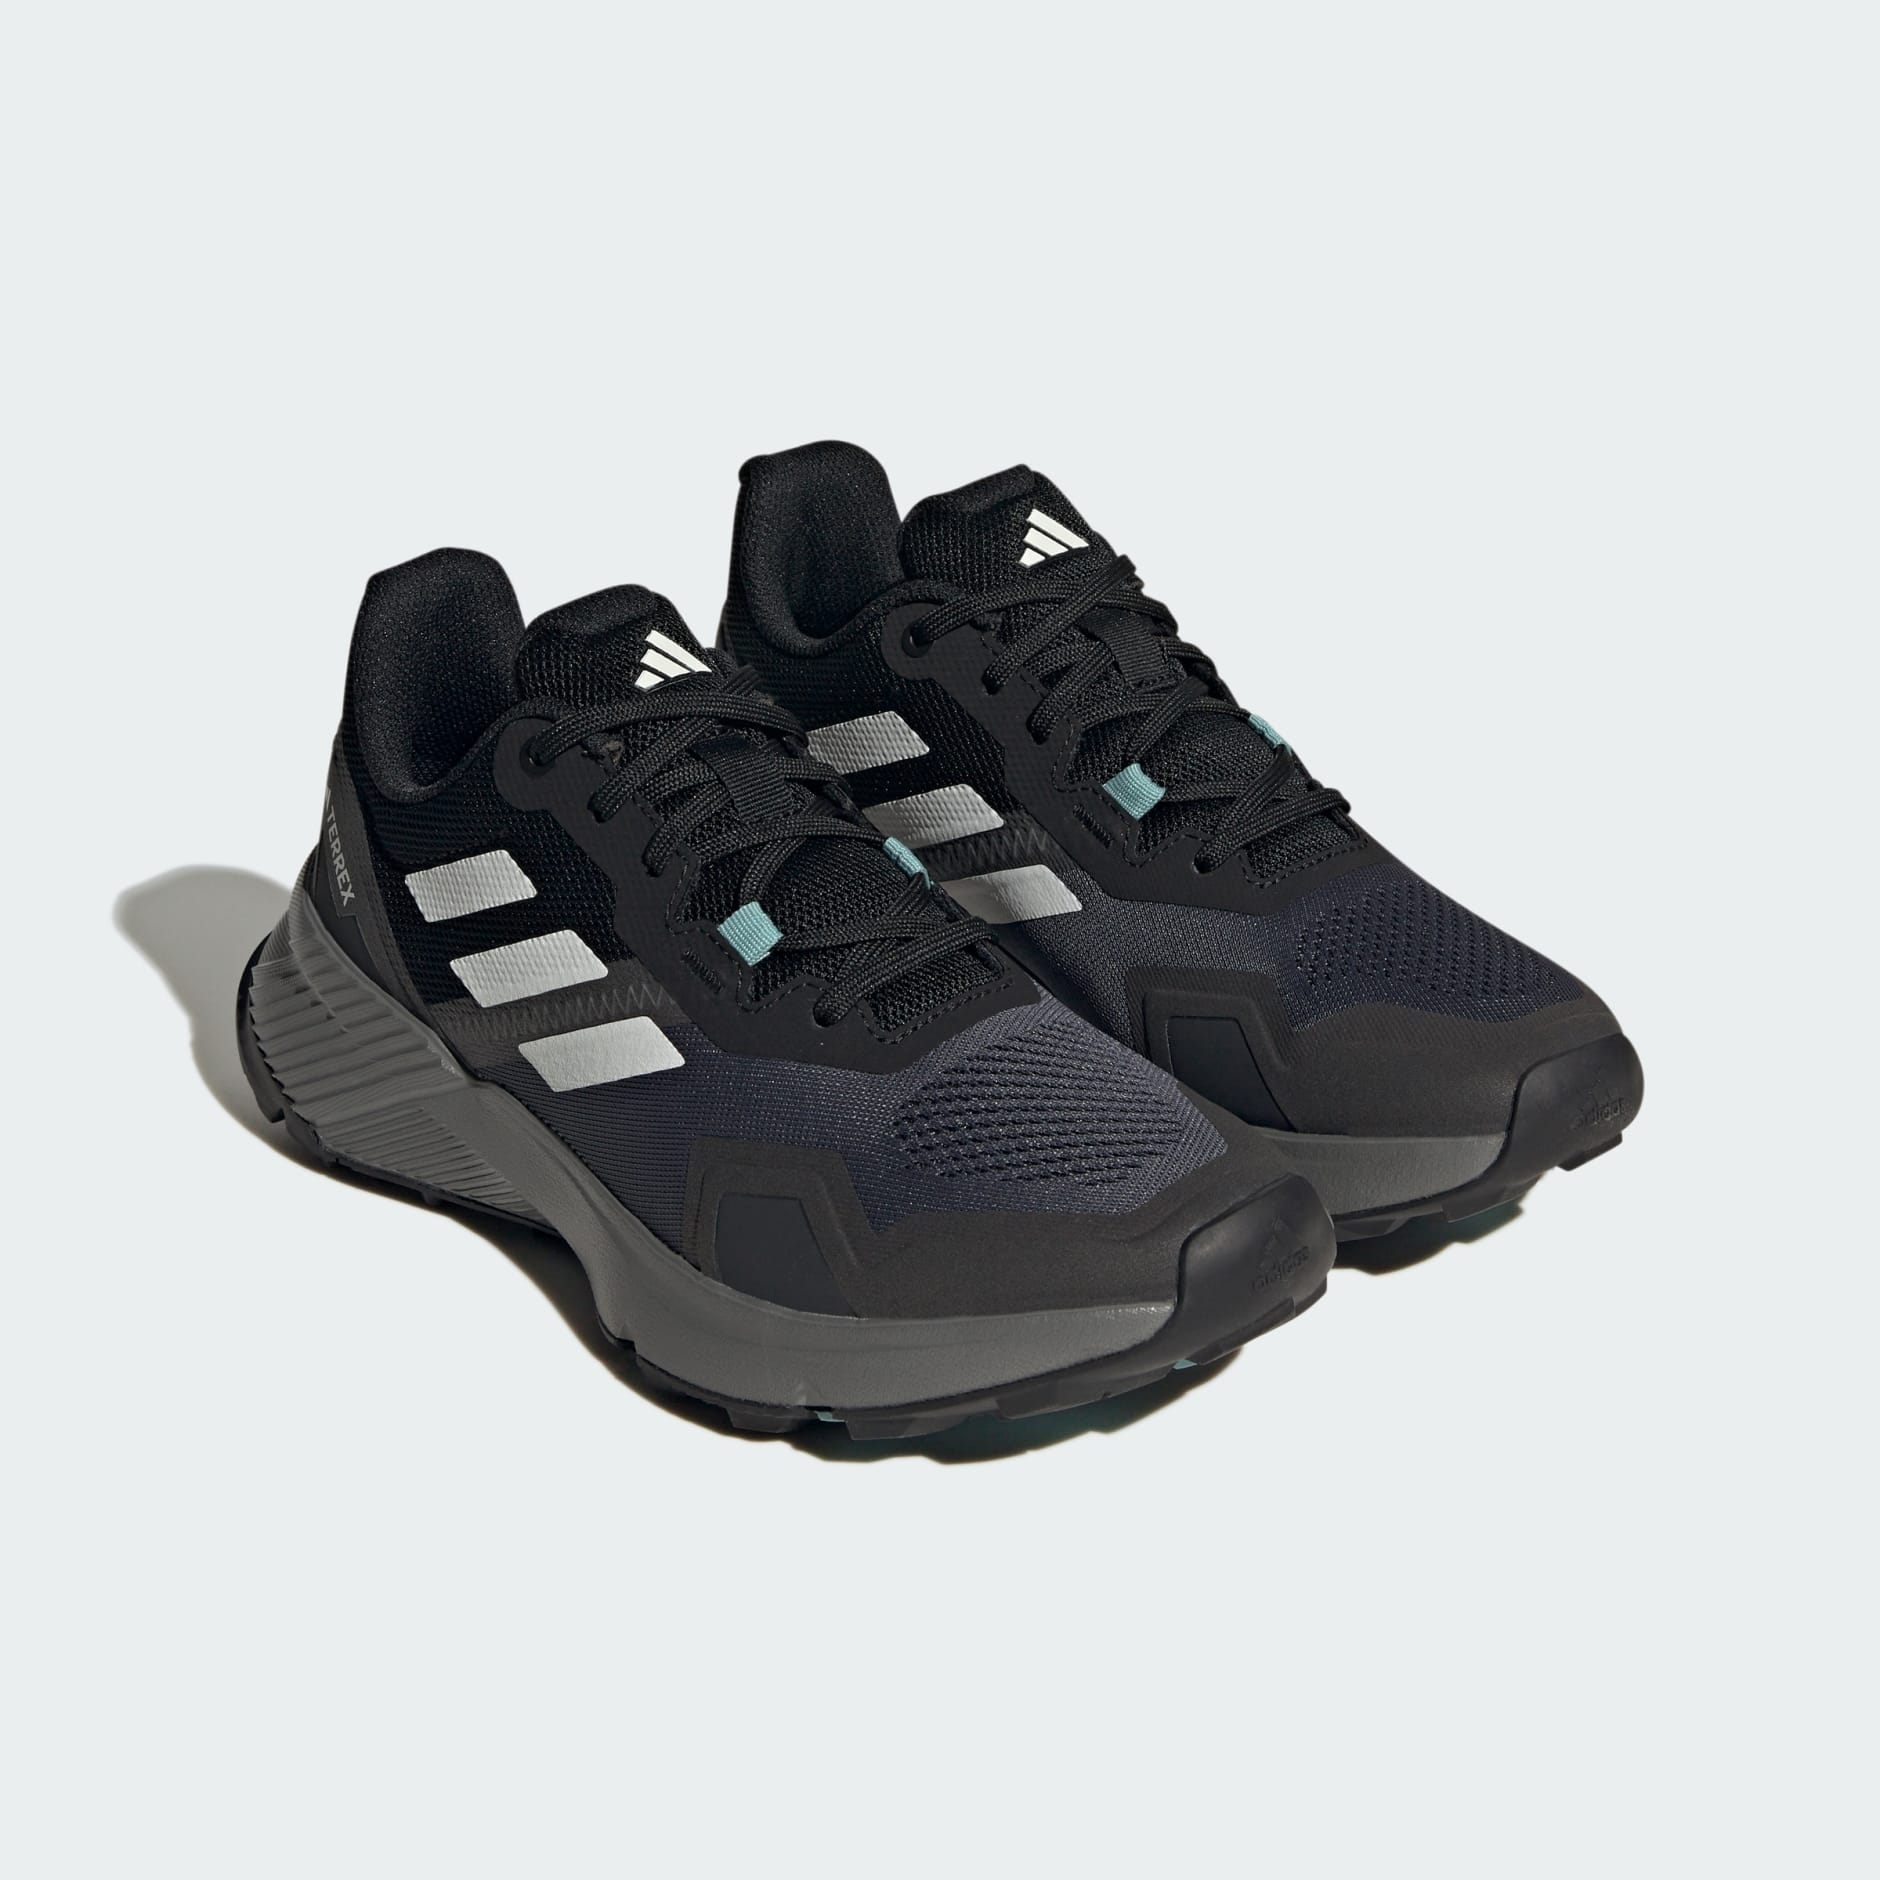 Shoes - Terrex Soulstride Trail Running Shoes - Black | adidas South Africa